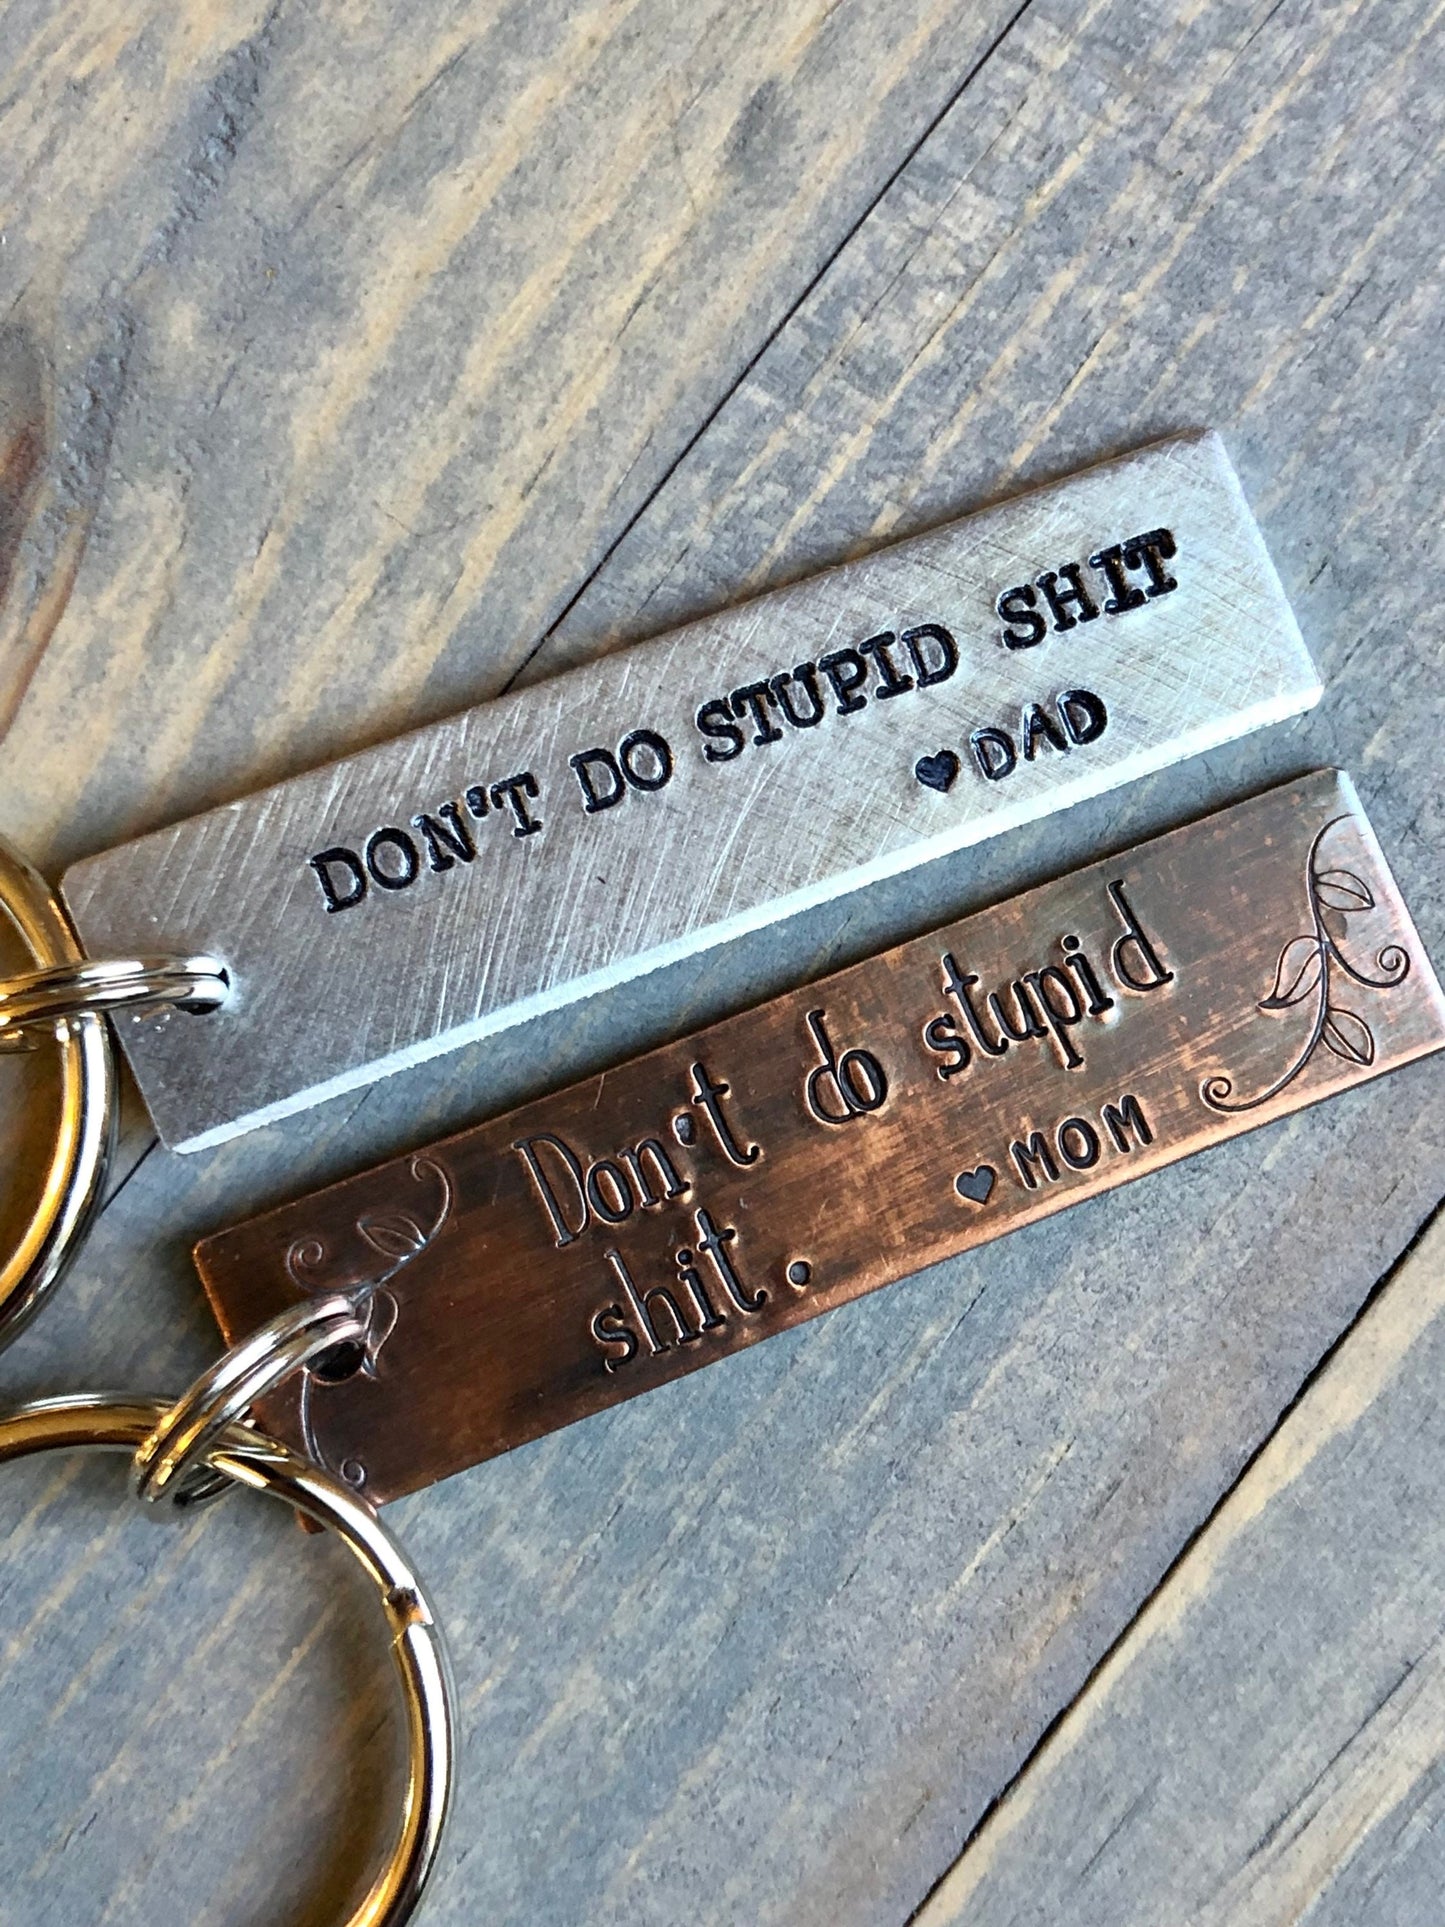 Small wooden Keychain - Don't do stupid shit – LivaBella Designs